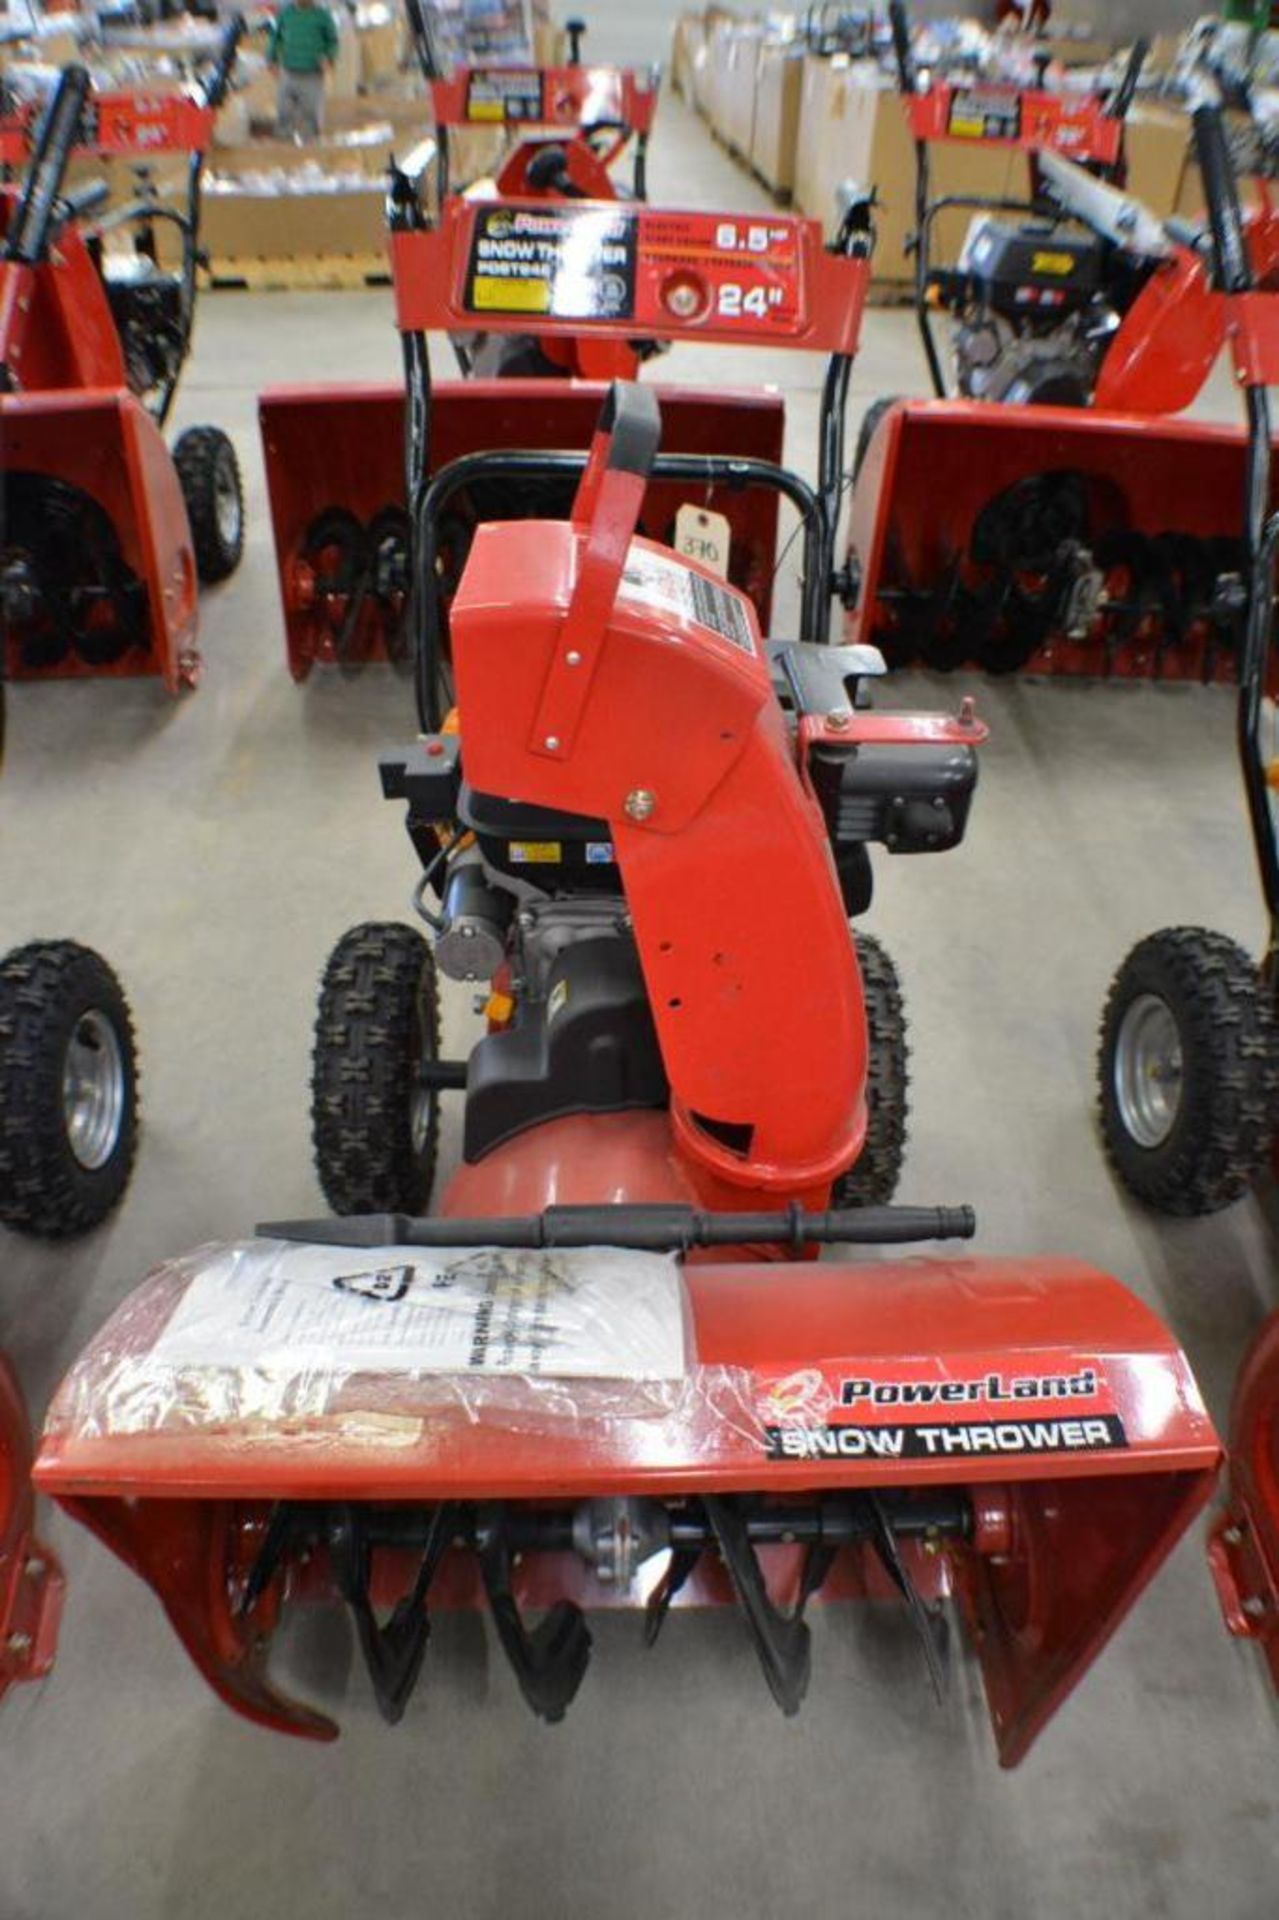 Snow Thrower 24in. 6.5HP with electric Start Engine 4 Stroke by Powerland - Image 2 of 6